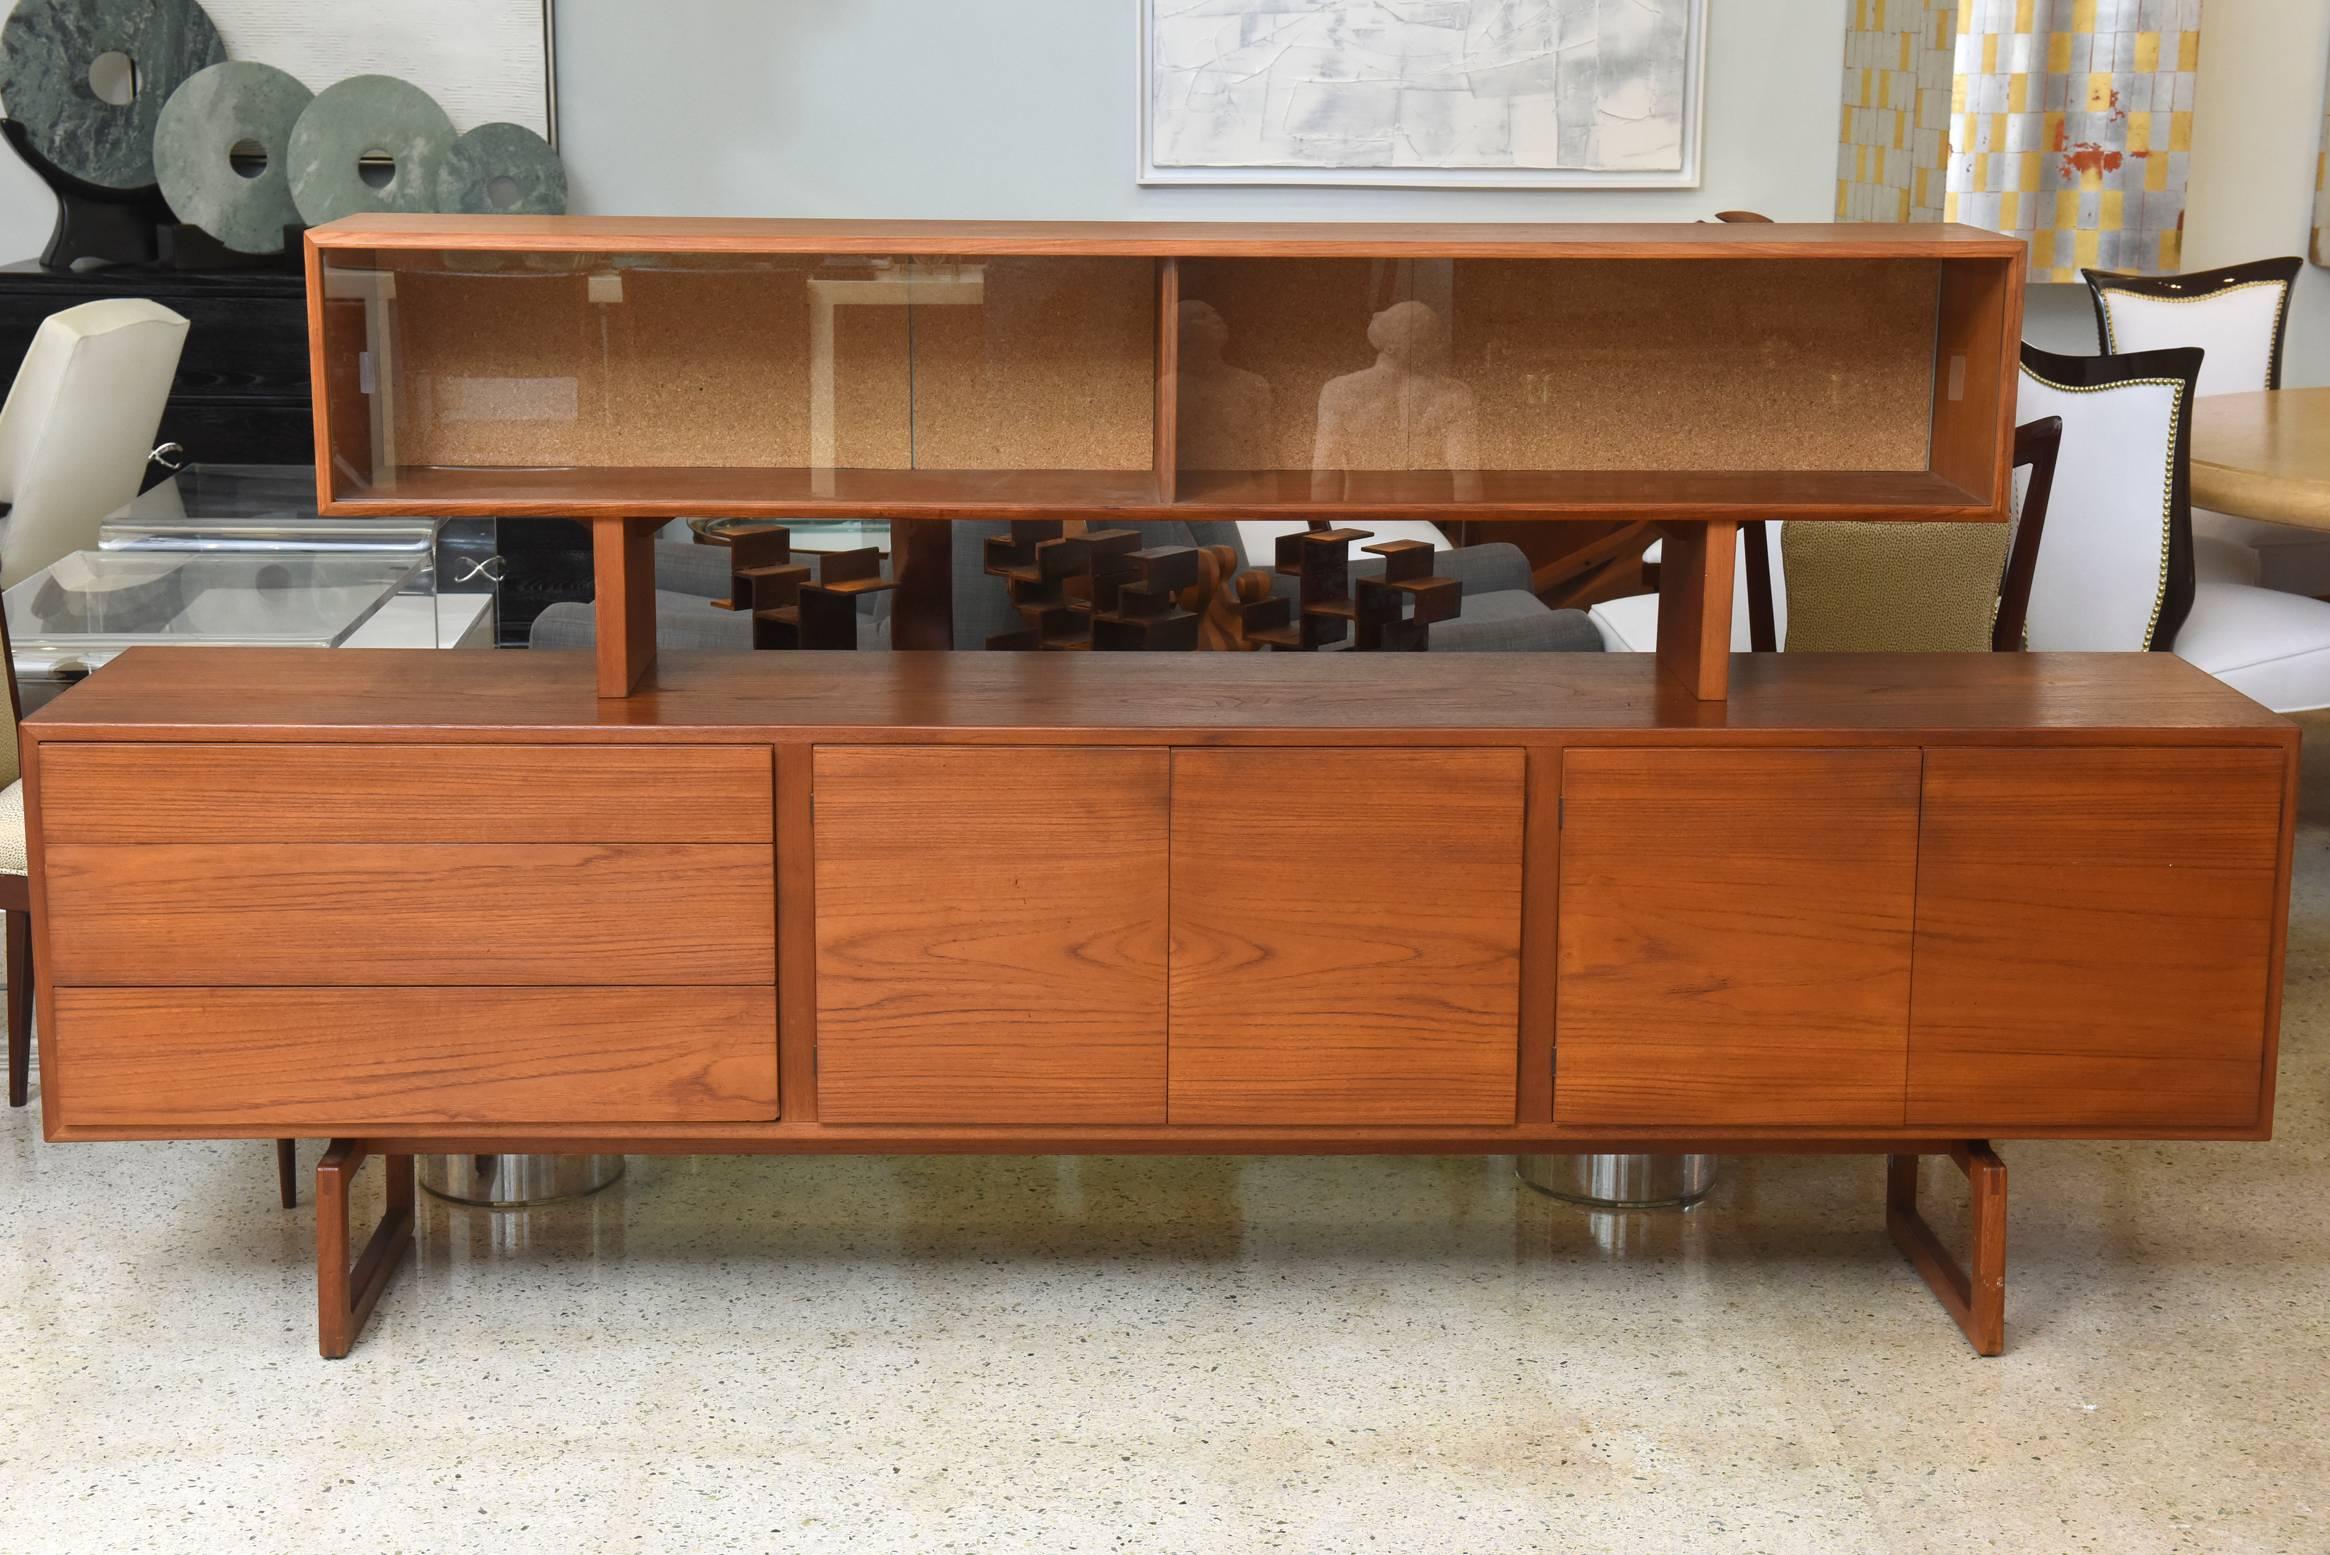 This Danish modern teak sideboard with superstructure by Bodil Kjaer was manufactured for E. Pedersen and Sons, circa 1950s. The piece comes with three compartments on a raised legs. The superstructure is elevated with two compartments for storage.